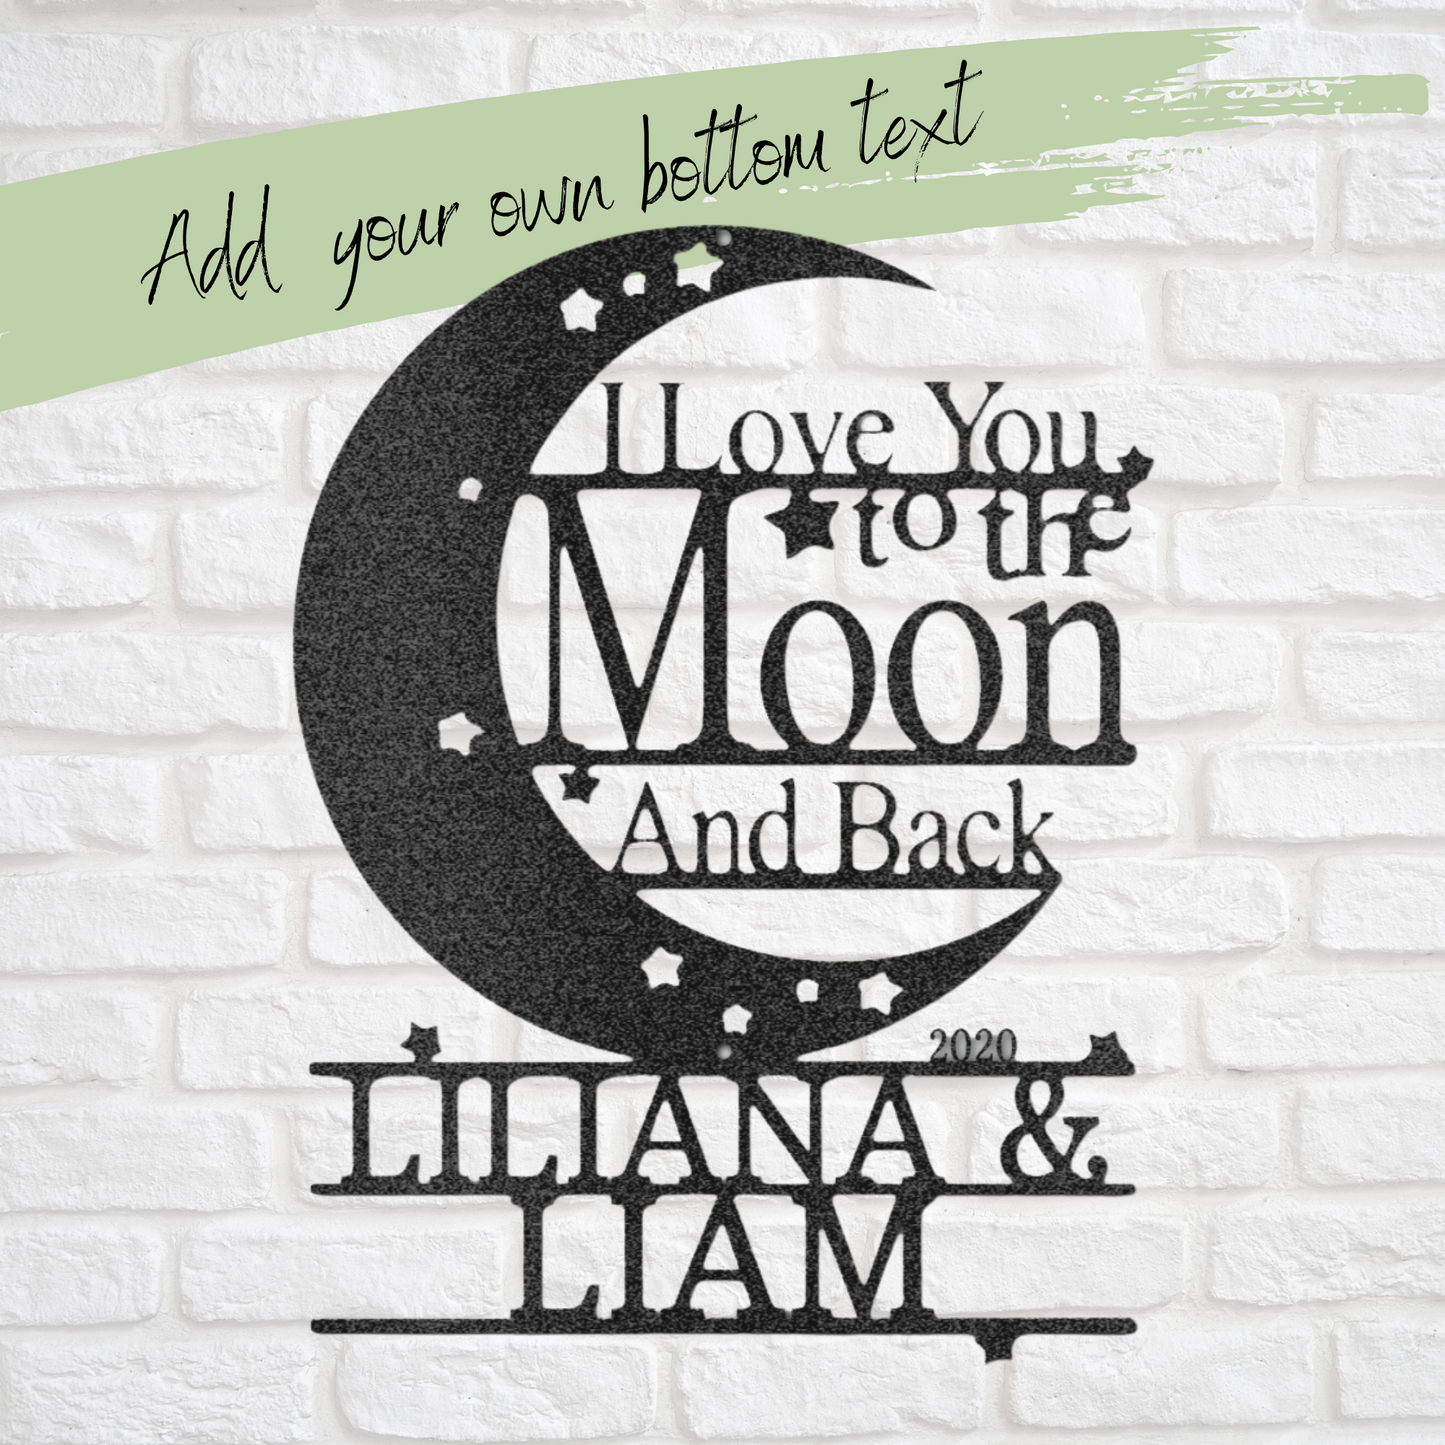 Personalized "I Love You to the Moon and Back" Metal Sign, Nursery Decor, Nursery Sign, Kids Bedroom Sign, Above Crib Sign, Baby Room Decor